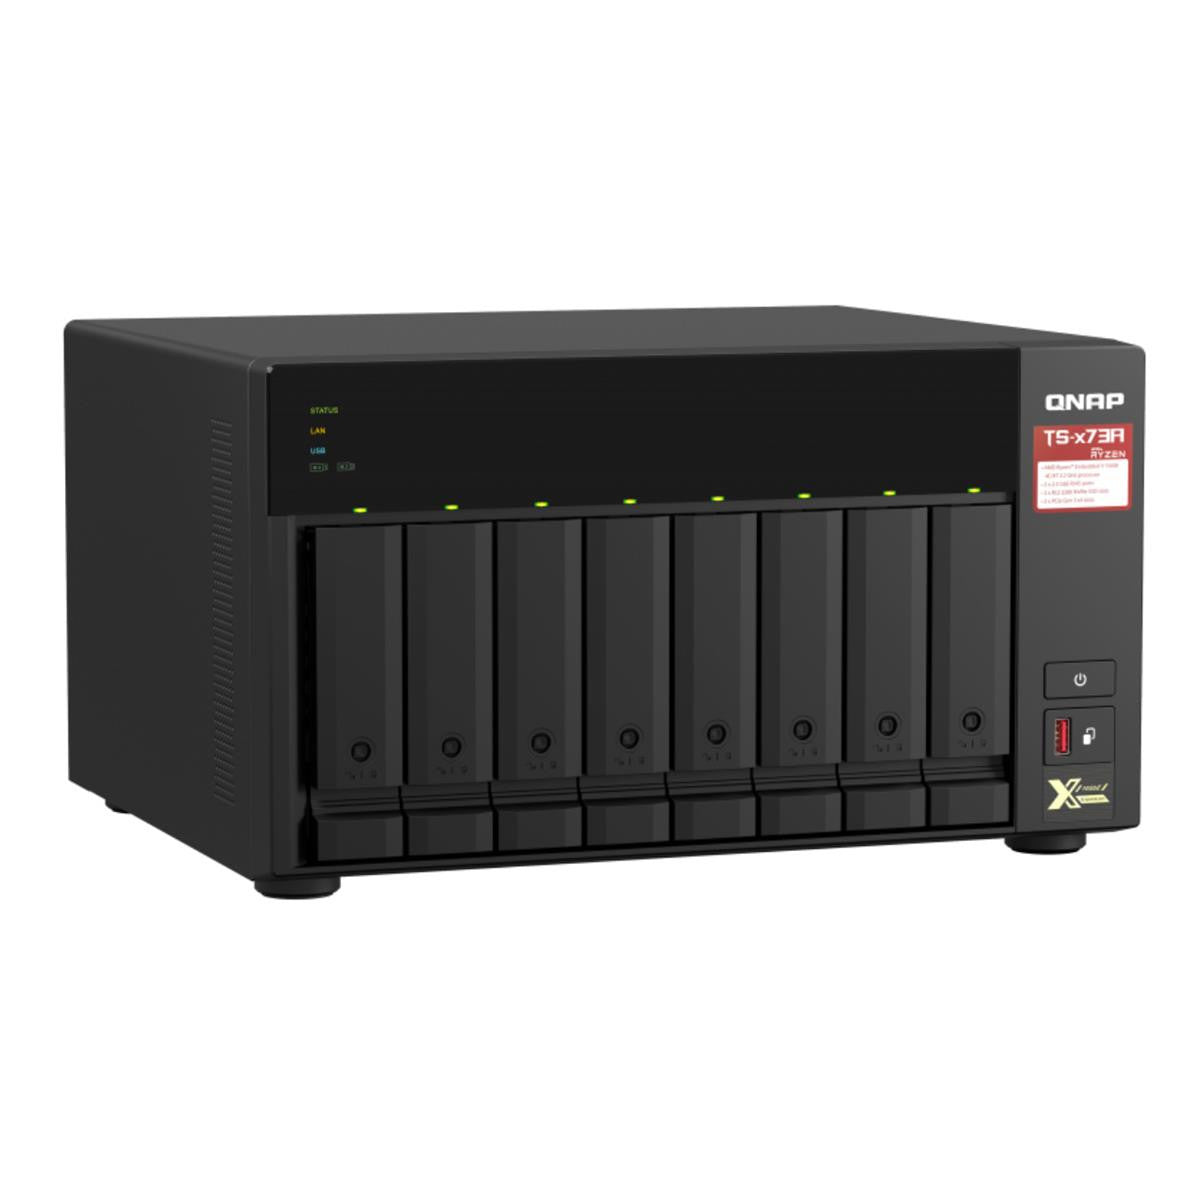 QNAP TS-873A 8-BAY NAS with 64GB DDR4 RAM and 96TB (8x12TB) Western Digital RED PLUS Drives Fully Assembled and Tested